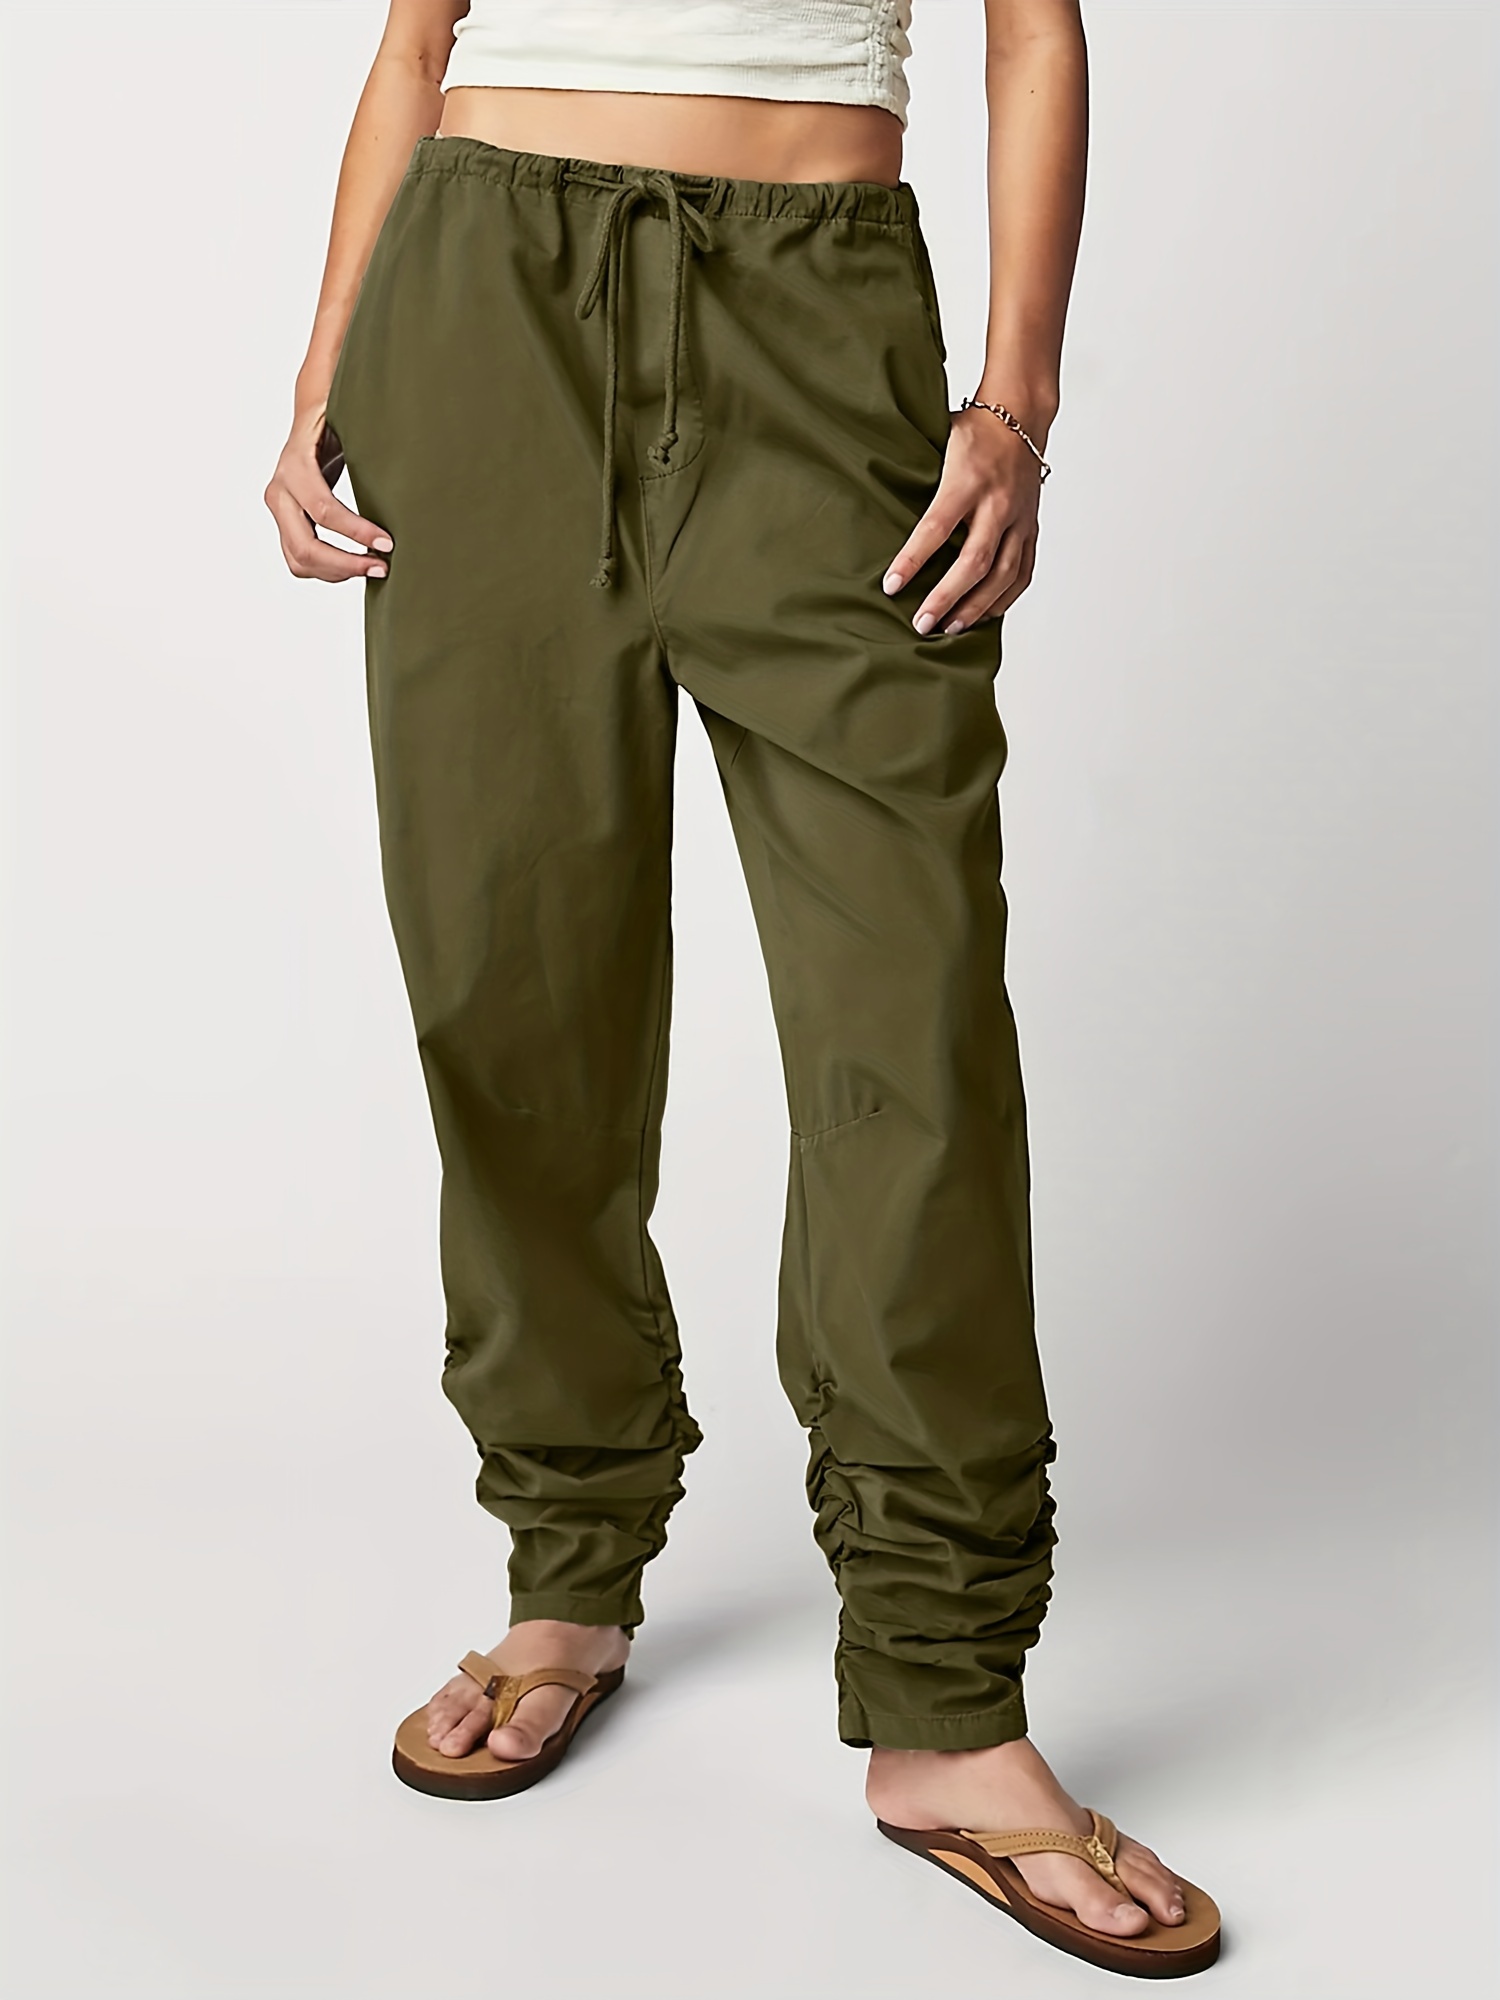 Solid Color Causal Cargo Pants, Slight Strech Hiking Running Pants, Women's  Athleisure